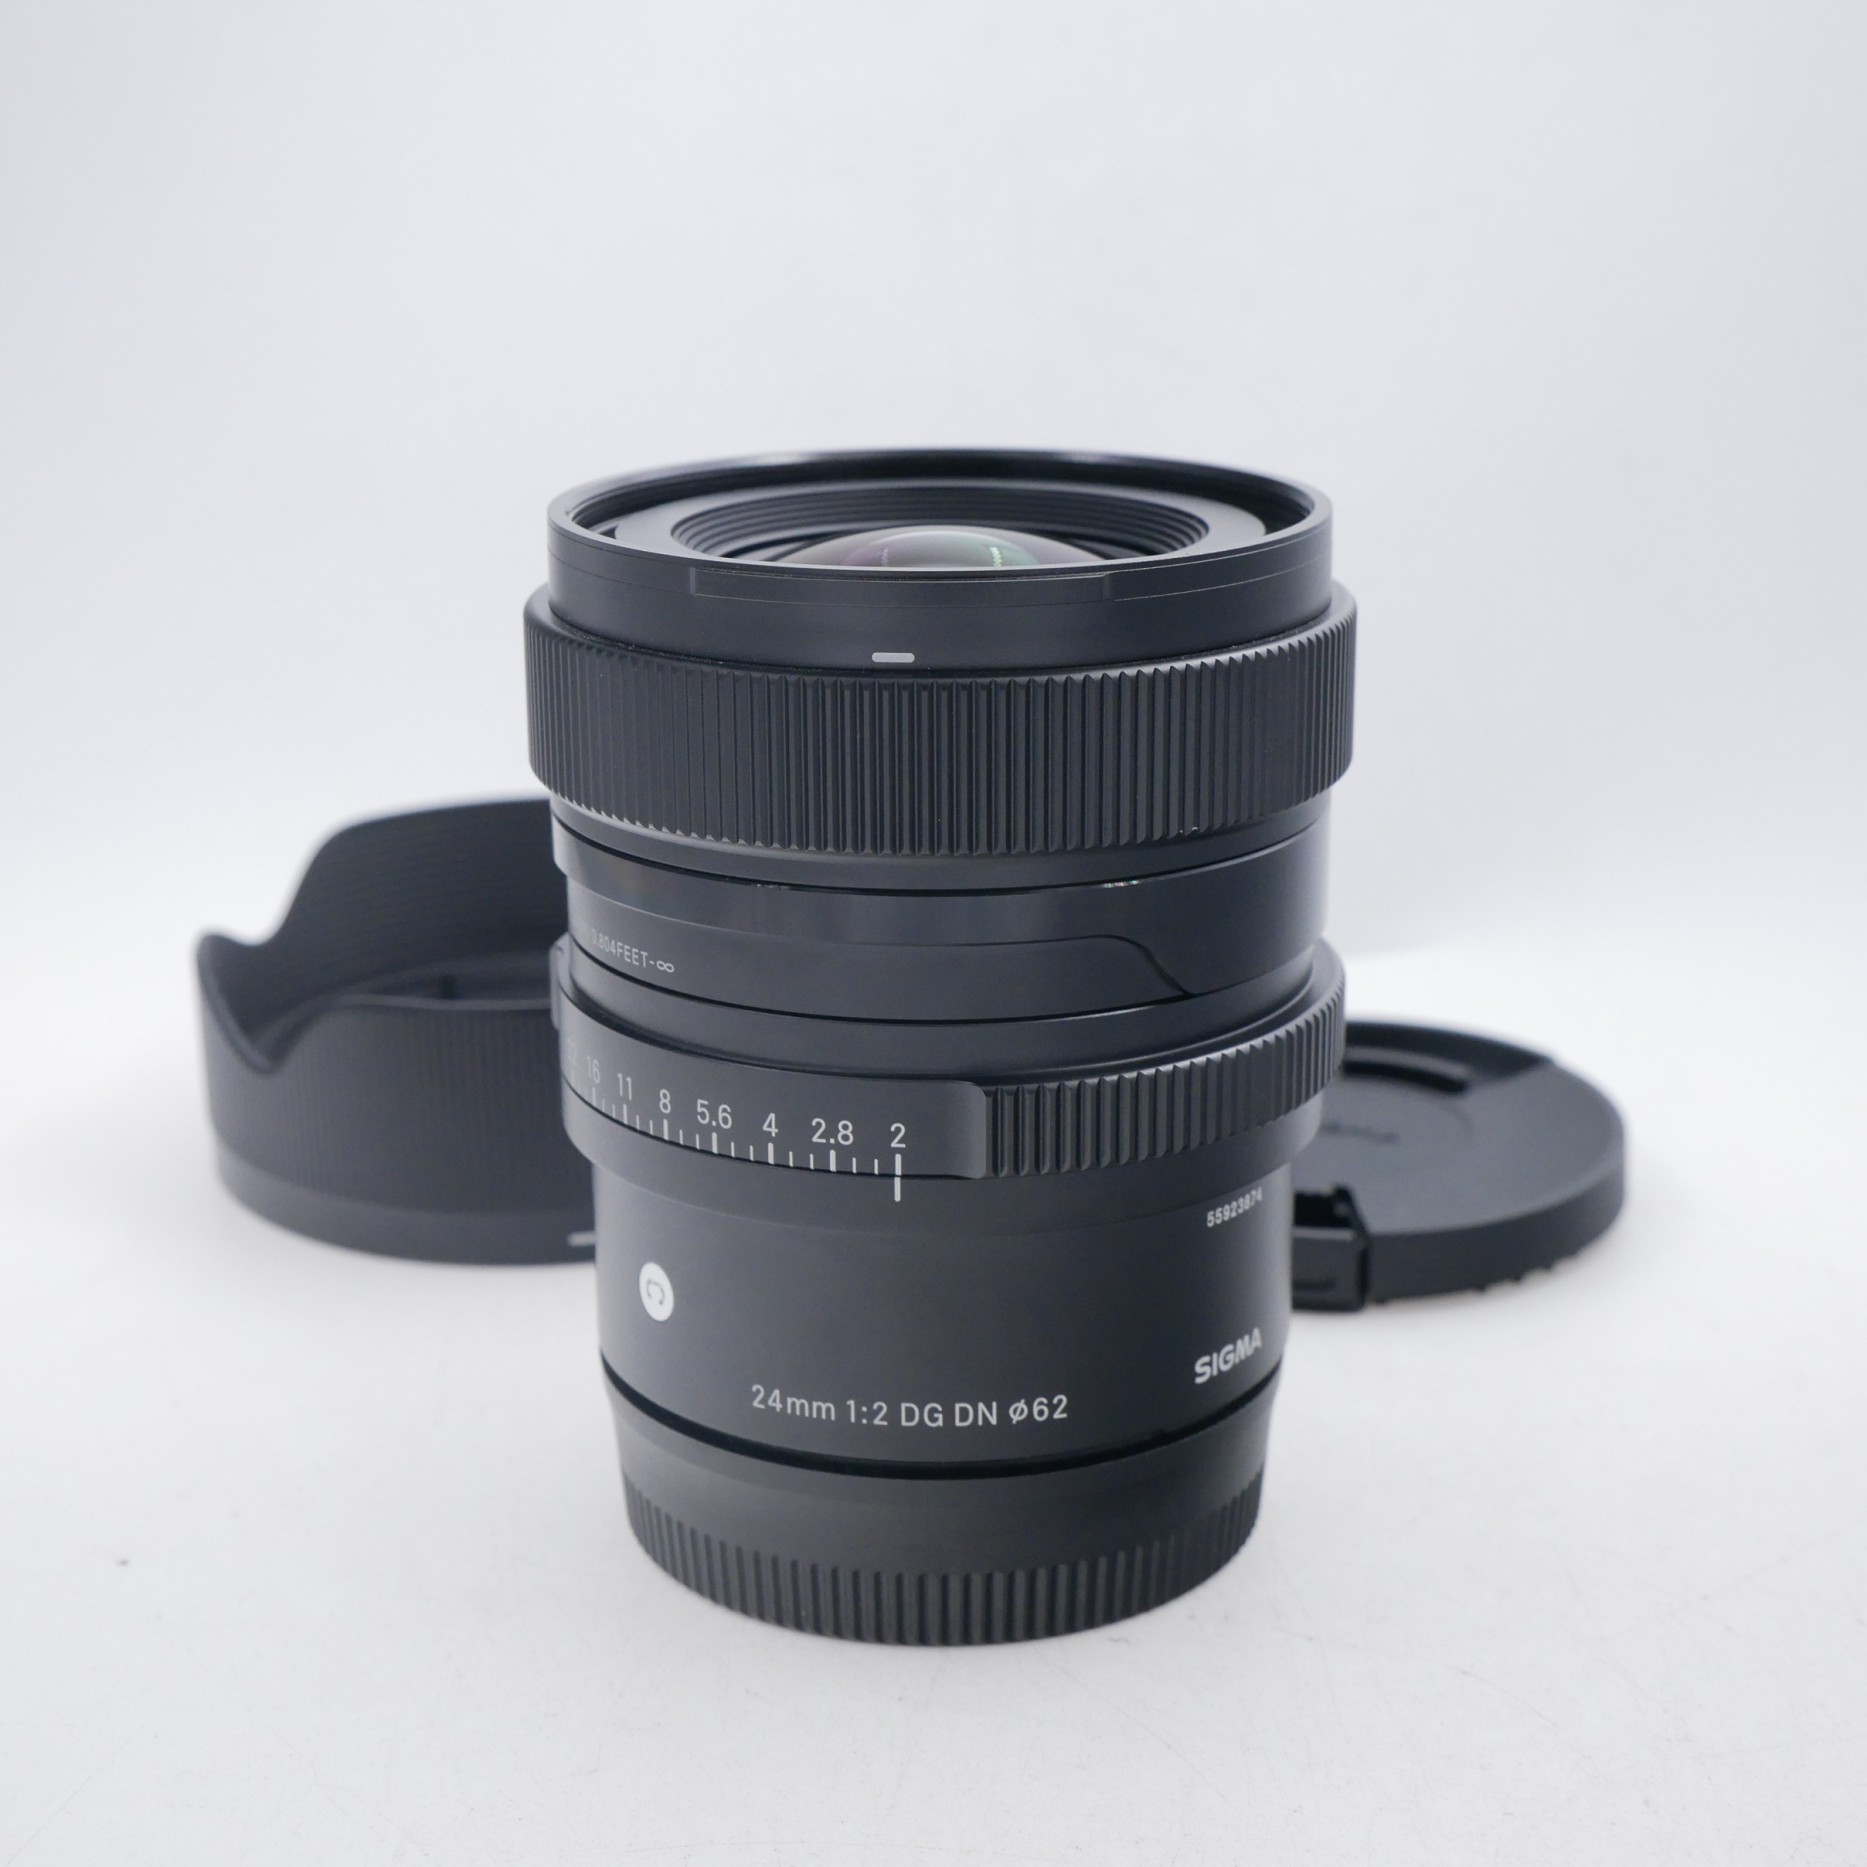 Sigma 24mm f2 DG DN for Sony E-mount